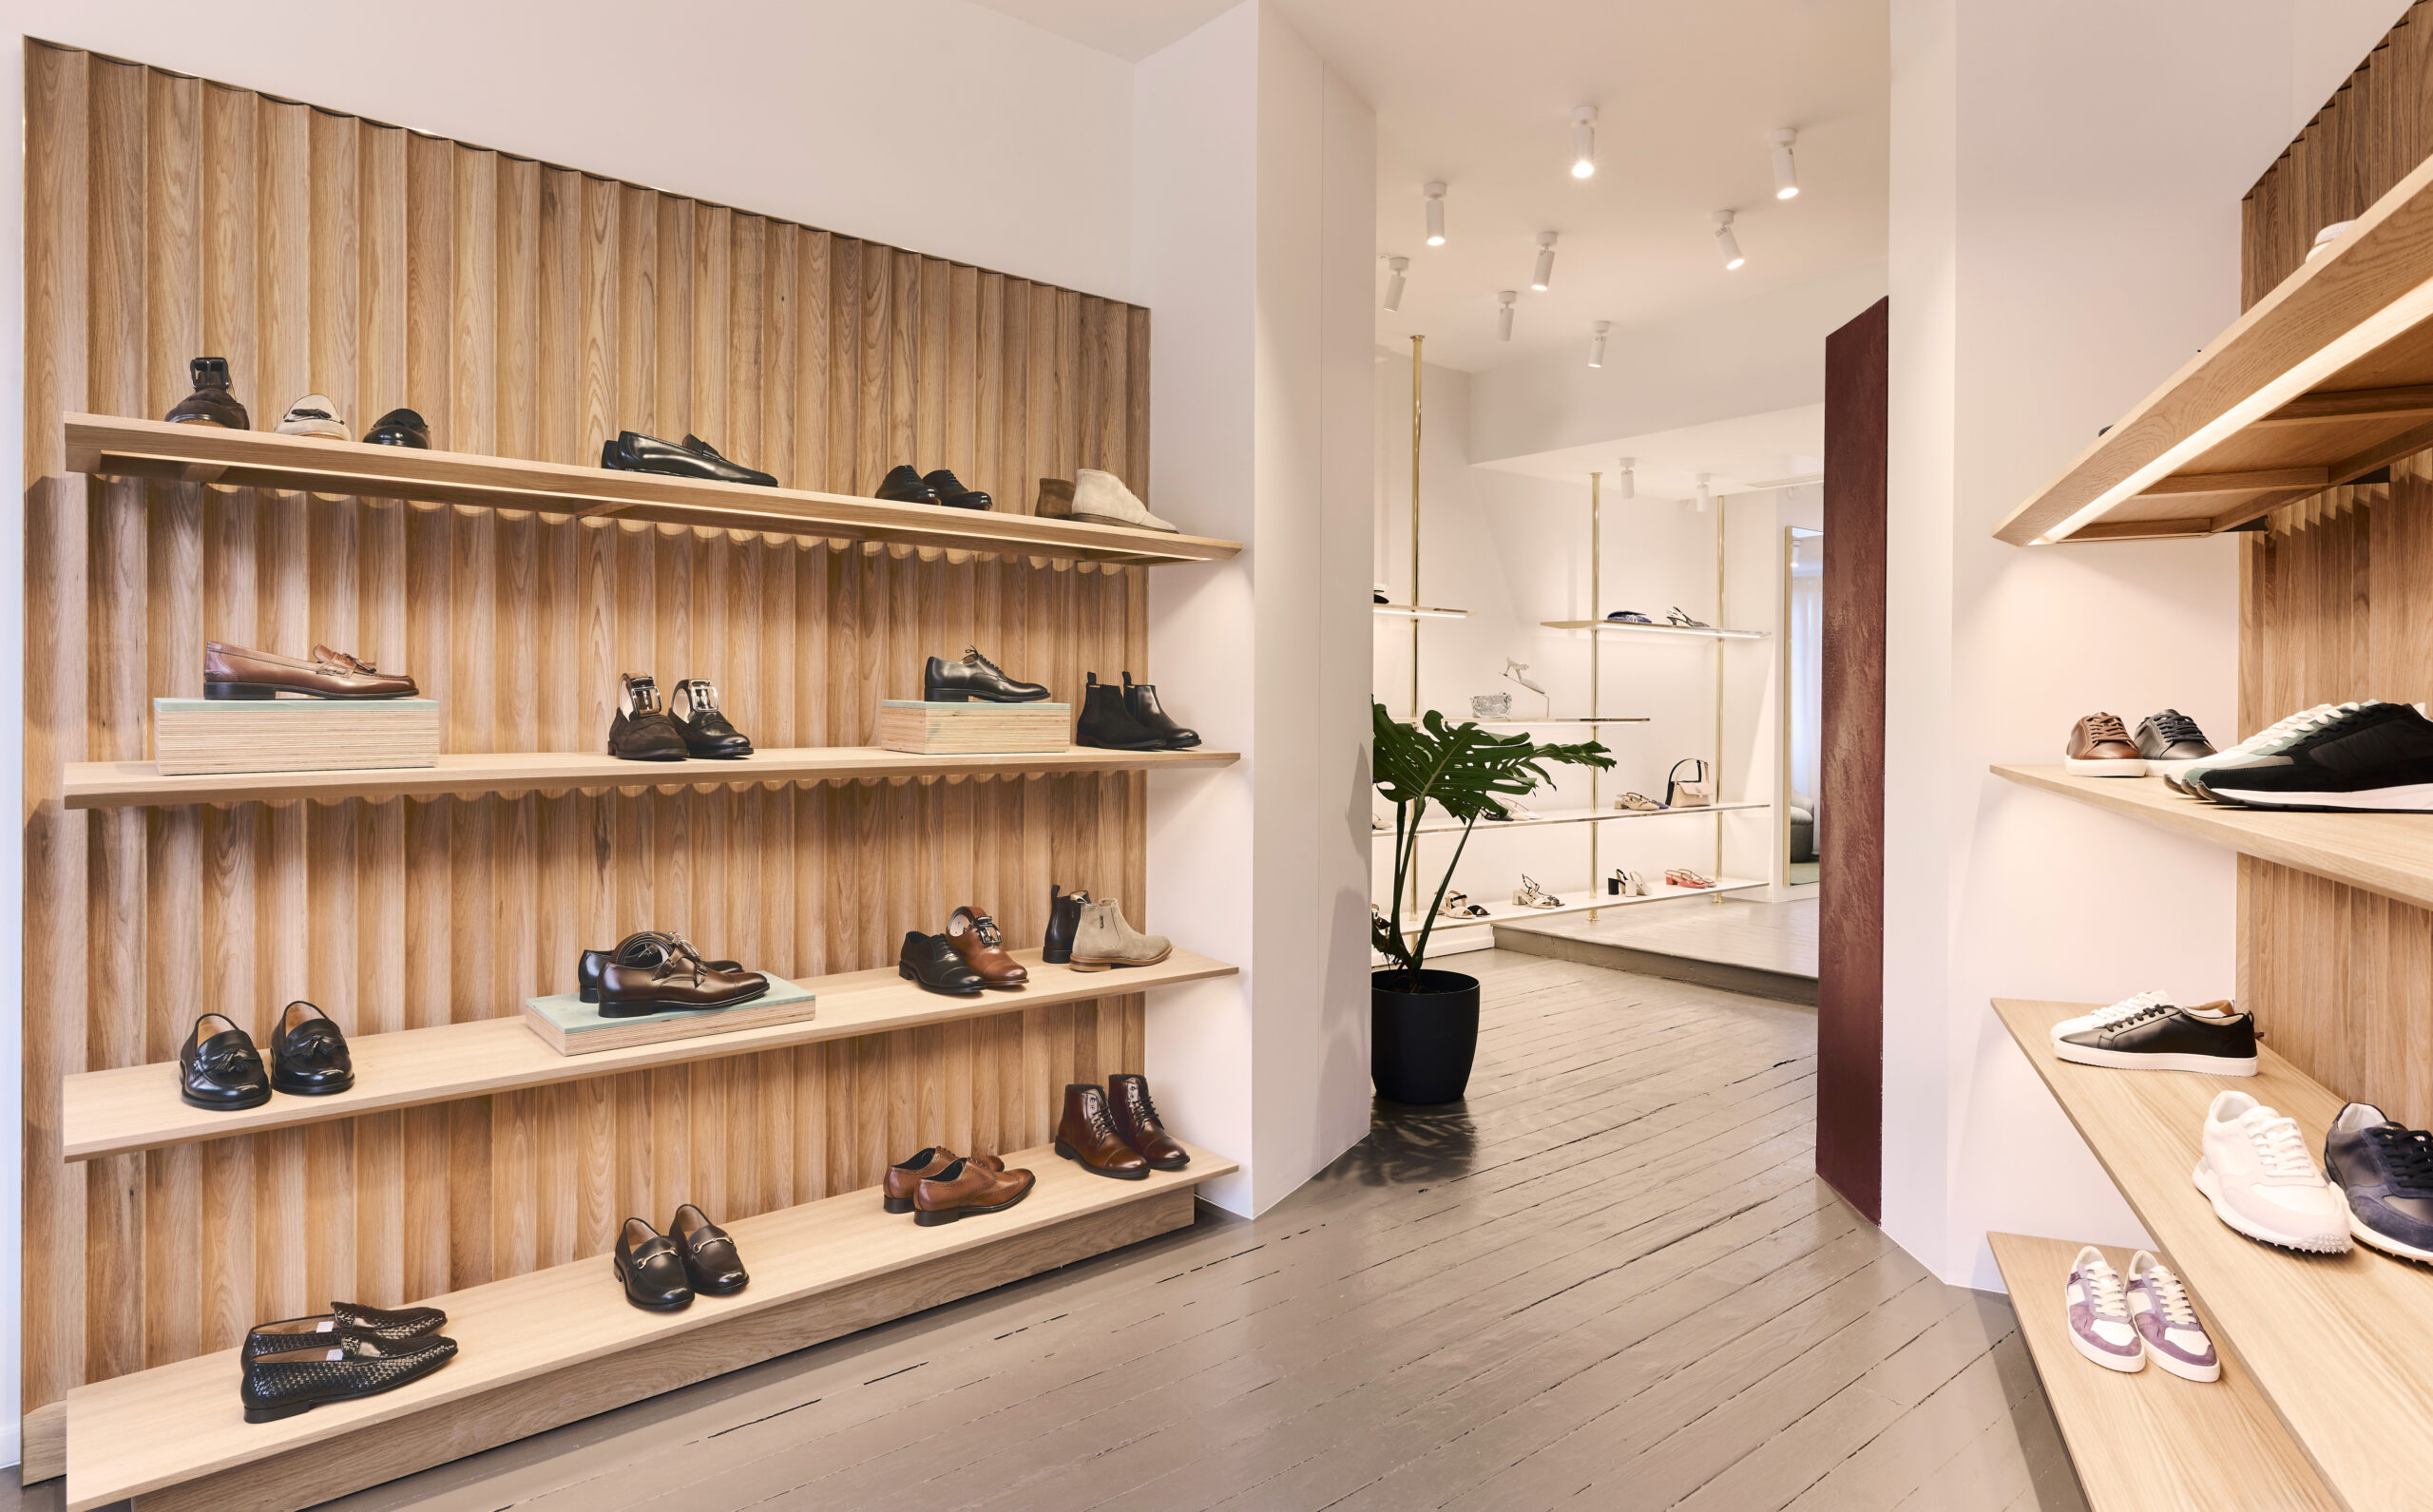 Russell & Bromley opens first of new concept stores in Hampstead with long-standing design partner Shed